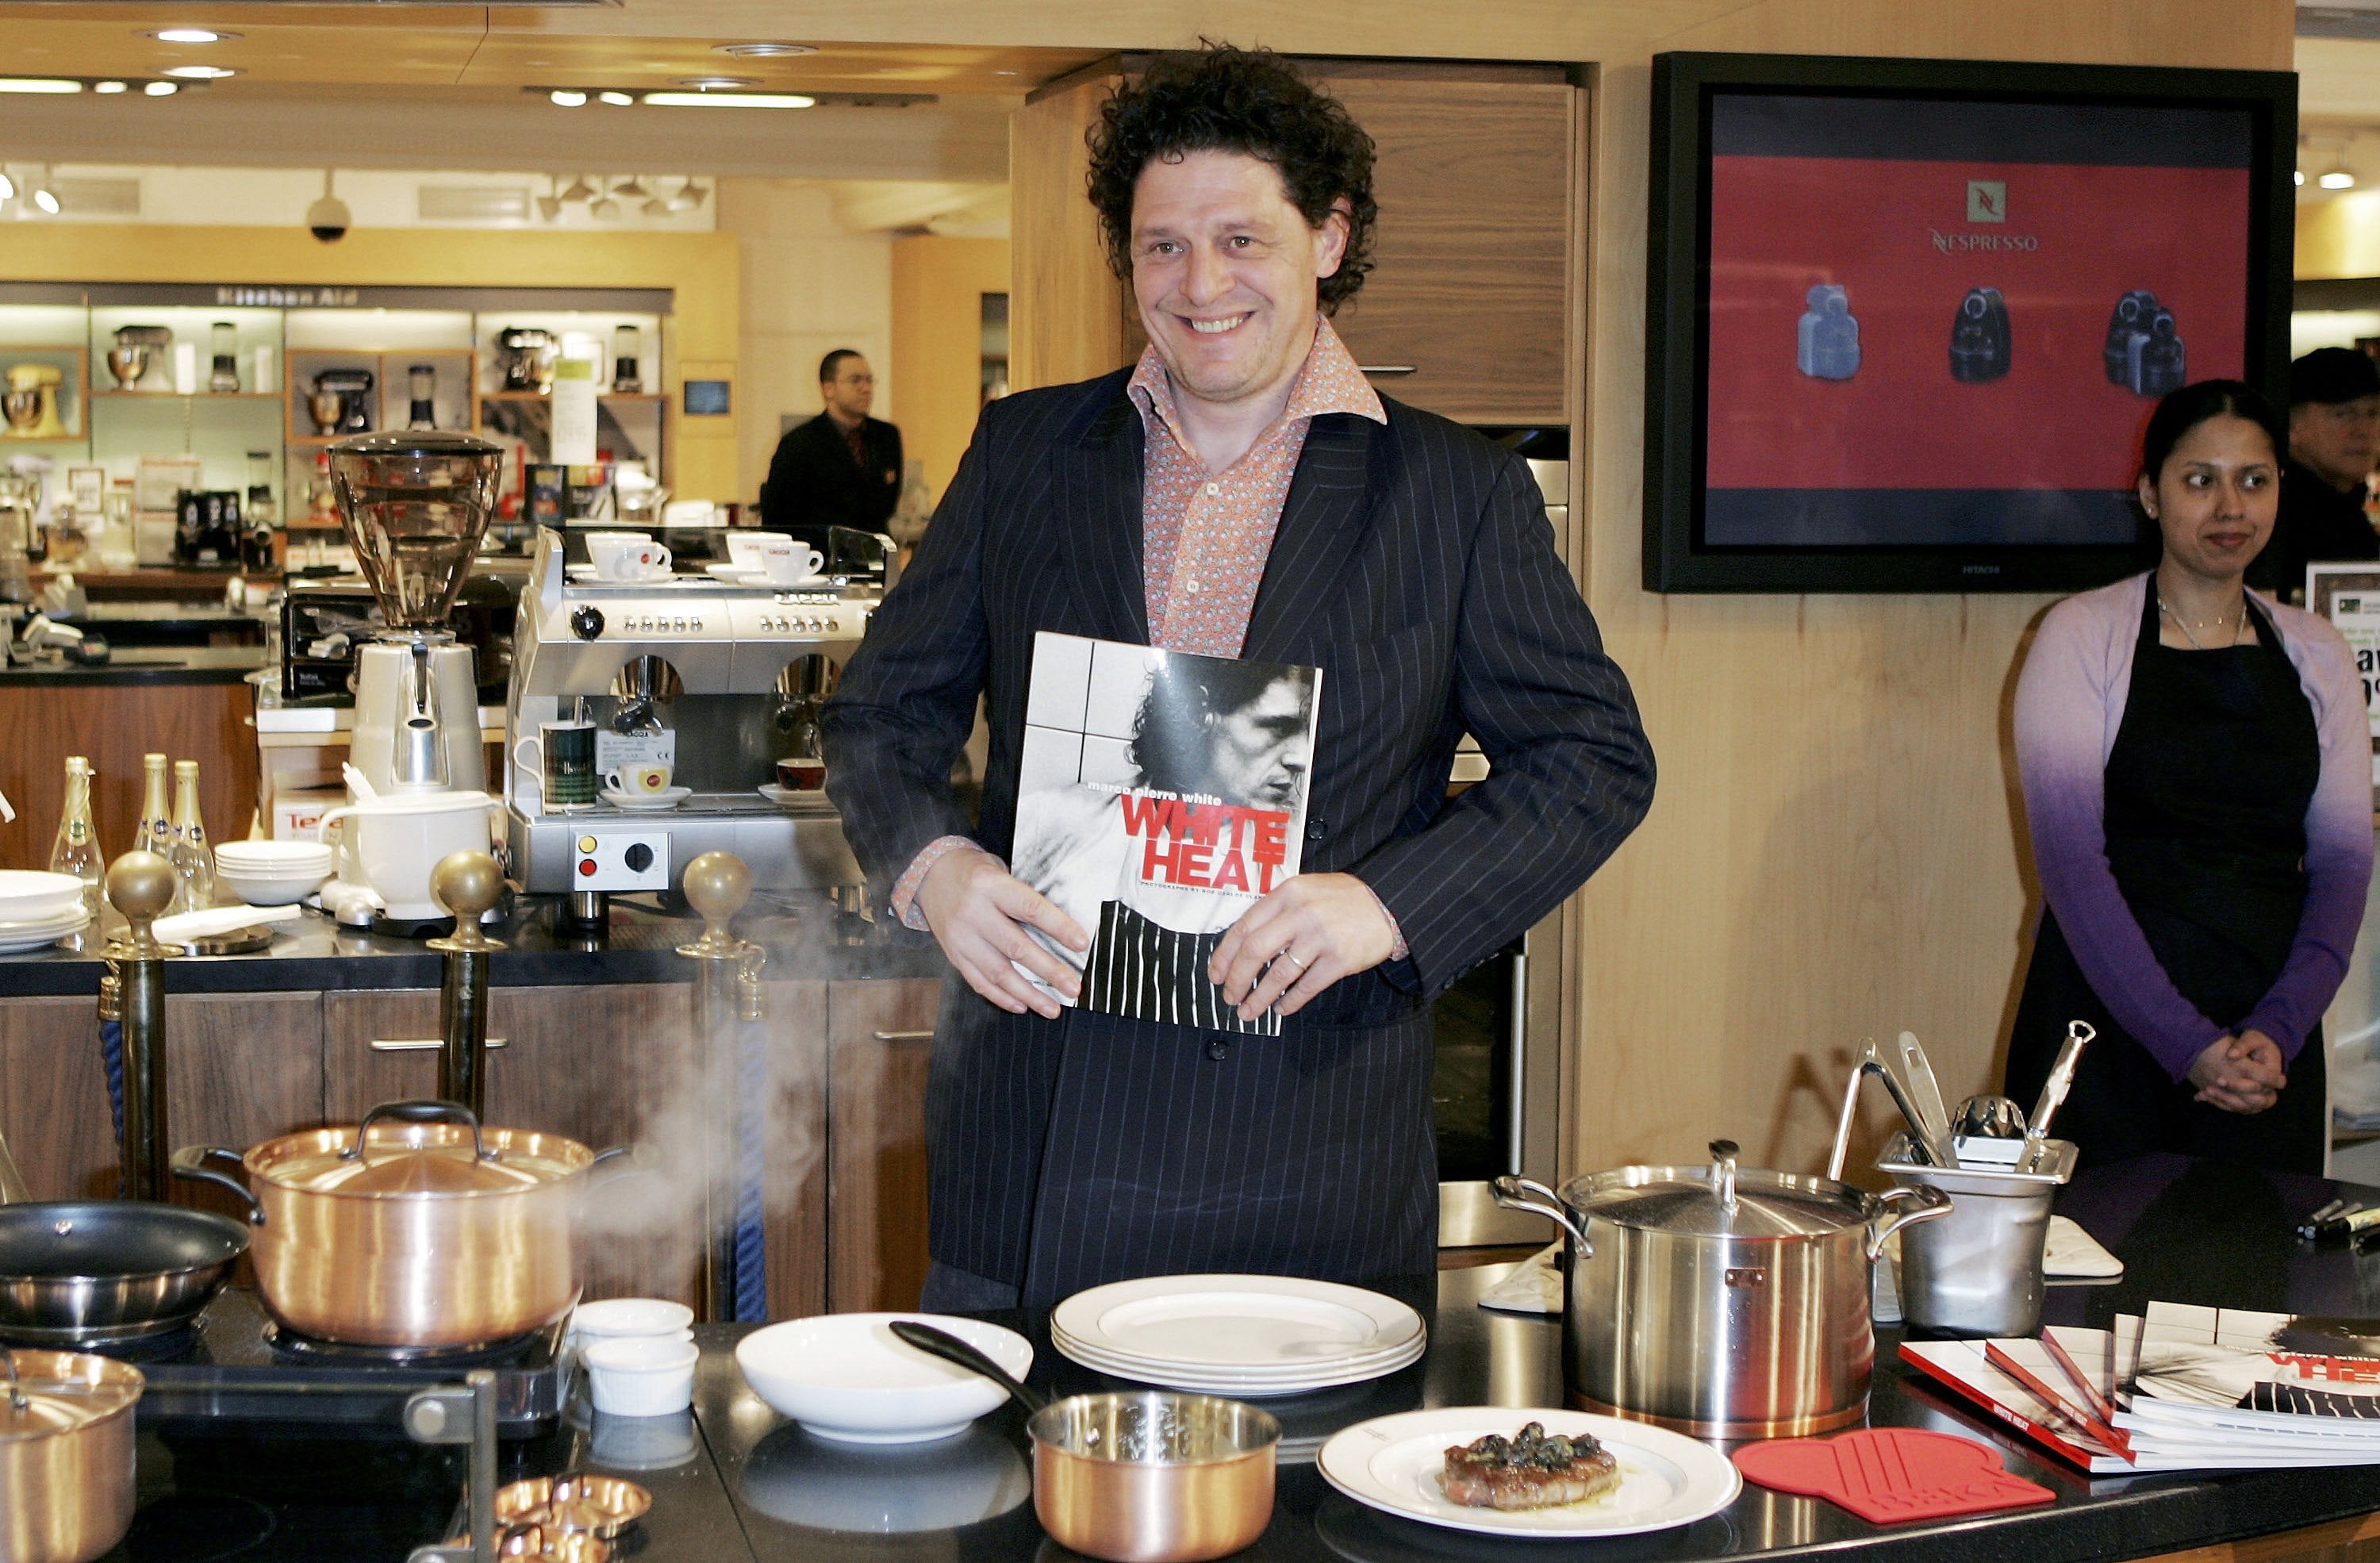 Marco Pierre White poses during the launch of his cookware, The White Heat Collection, with a copy of his book ‘White Heat’, on 8 April 2006 at Harrods in London, England